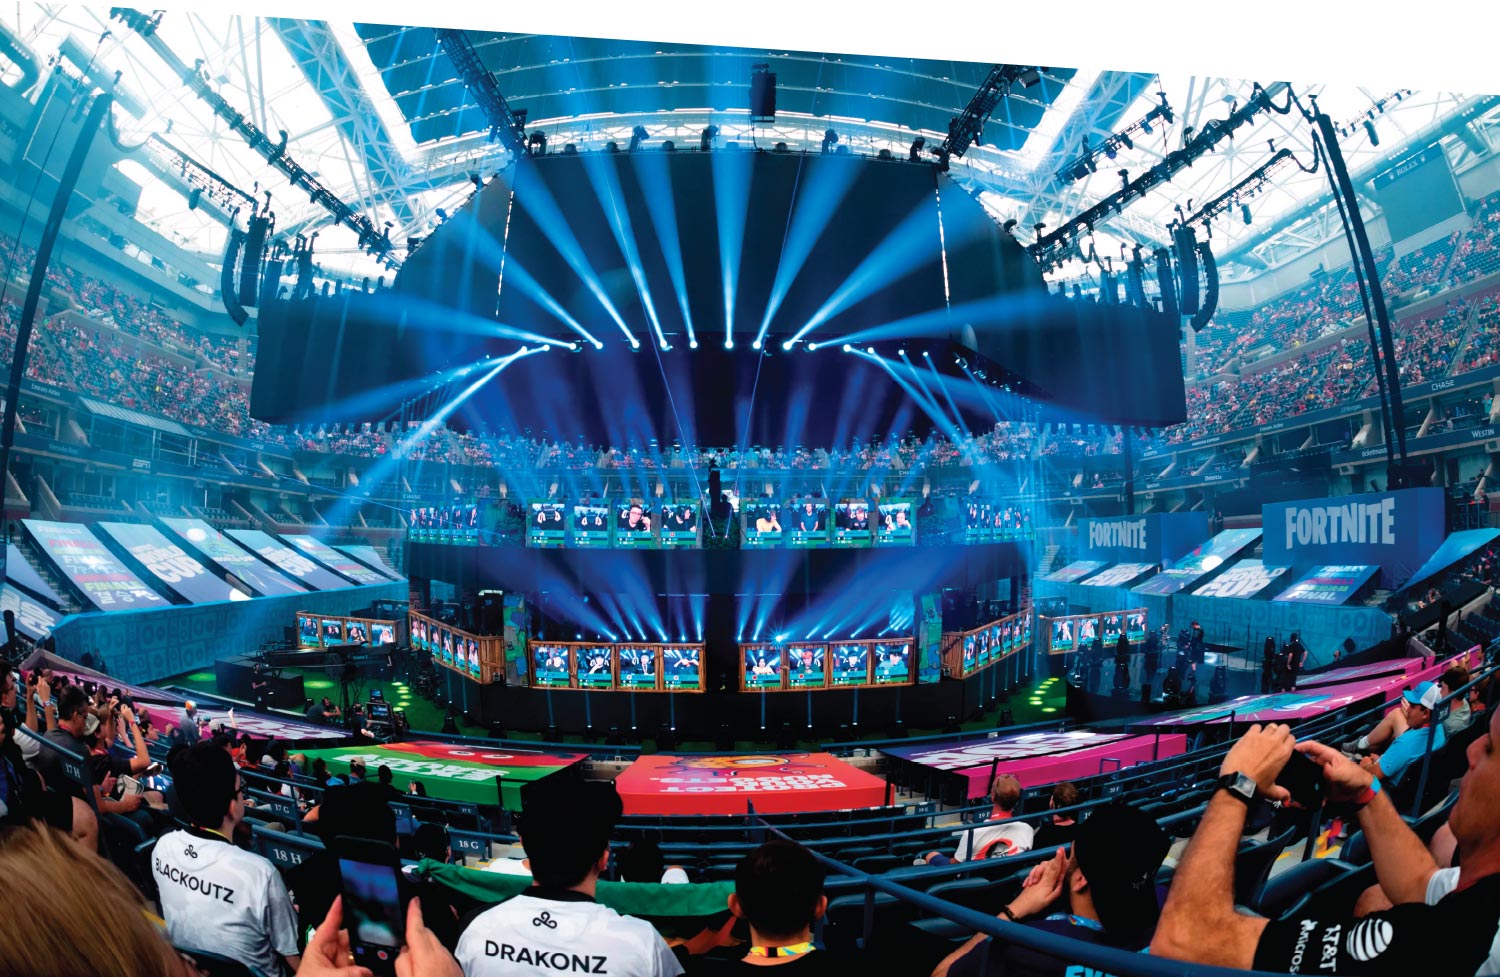 Fans cheer at the start of the 2019 Fortnite World Cup Finals on July 27, at Arthur Ashe Stadium in New York City.